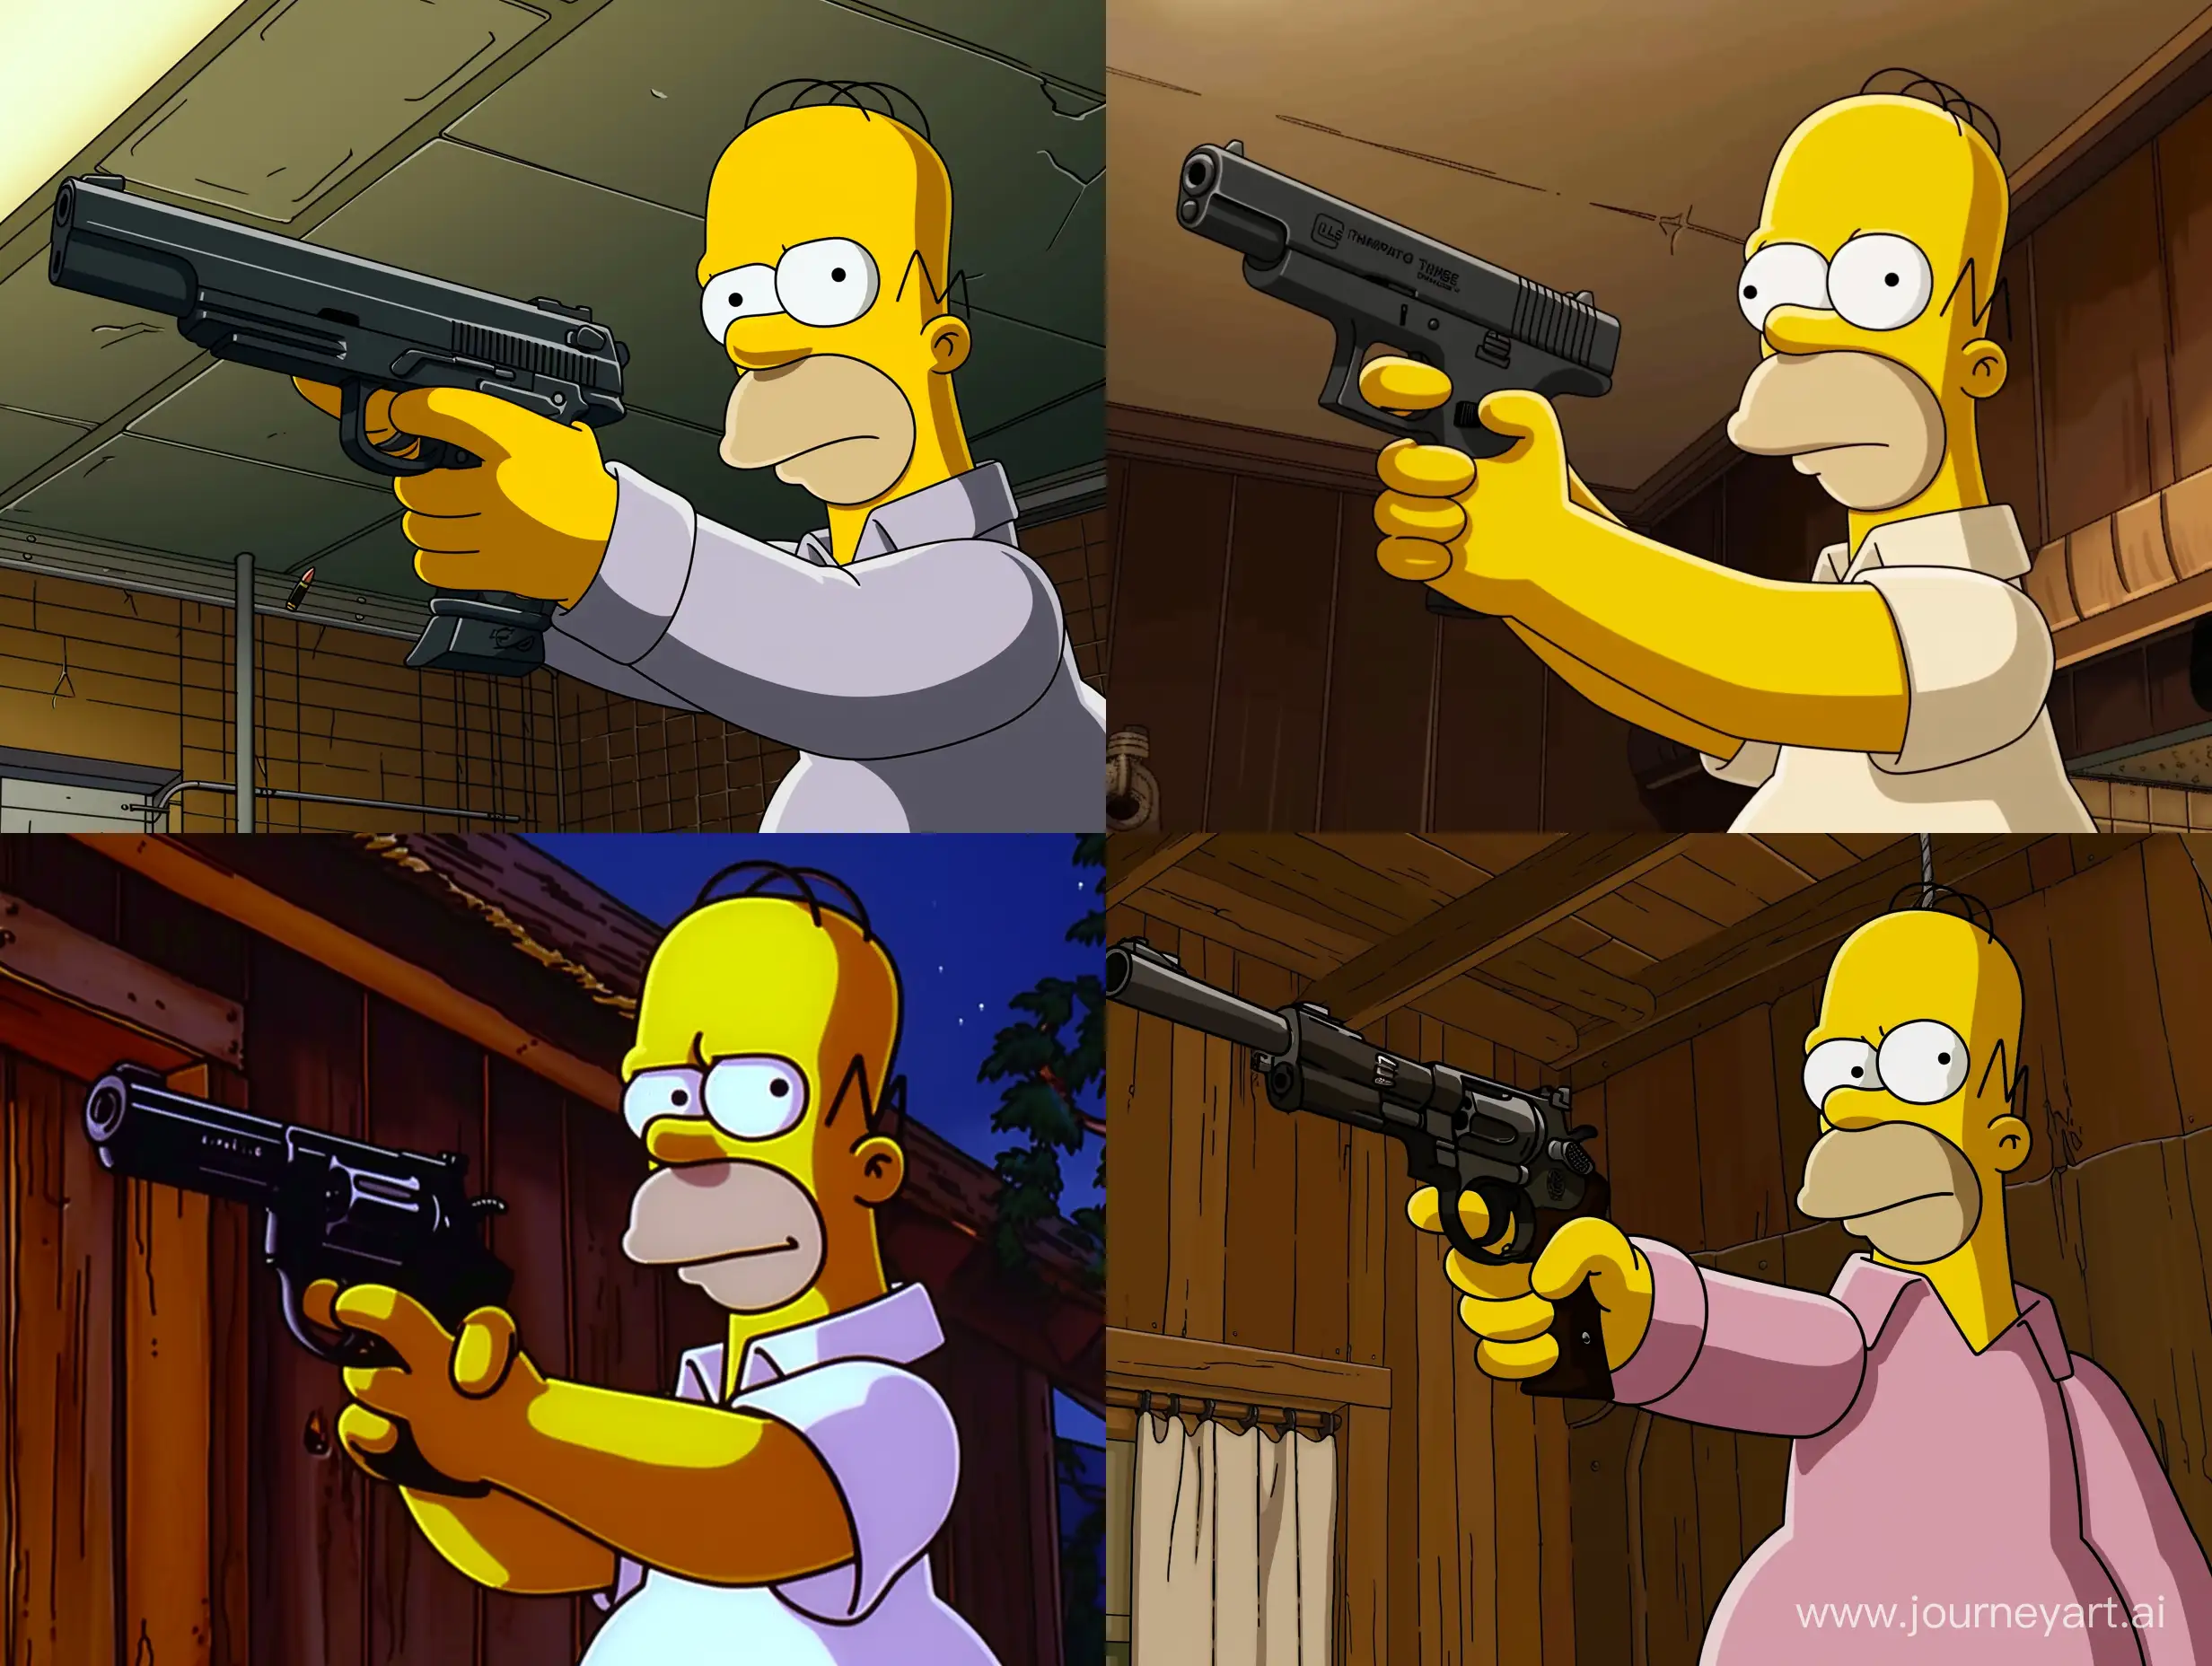 Homer-Simpson-Wielding-a-Thompson-Gun-Iconic-Still-from-The-Simpsons